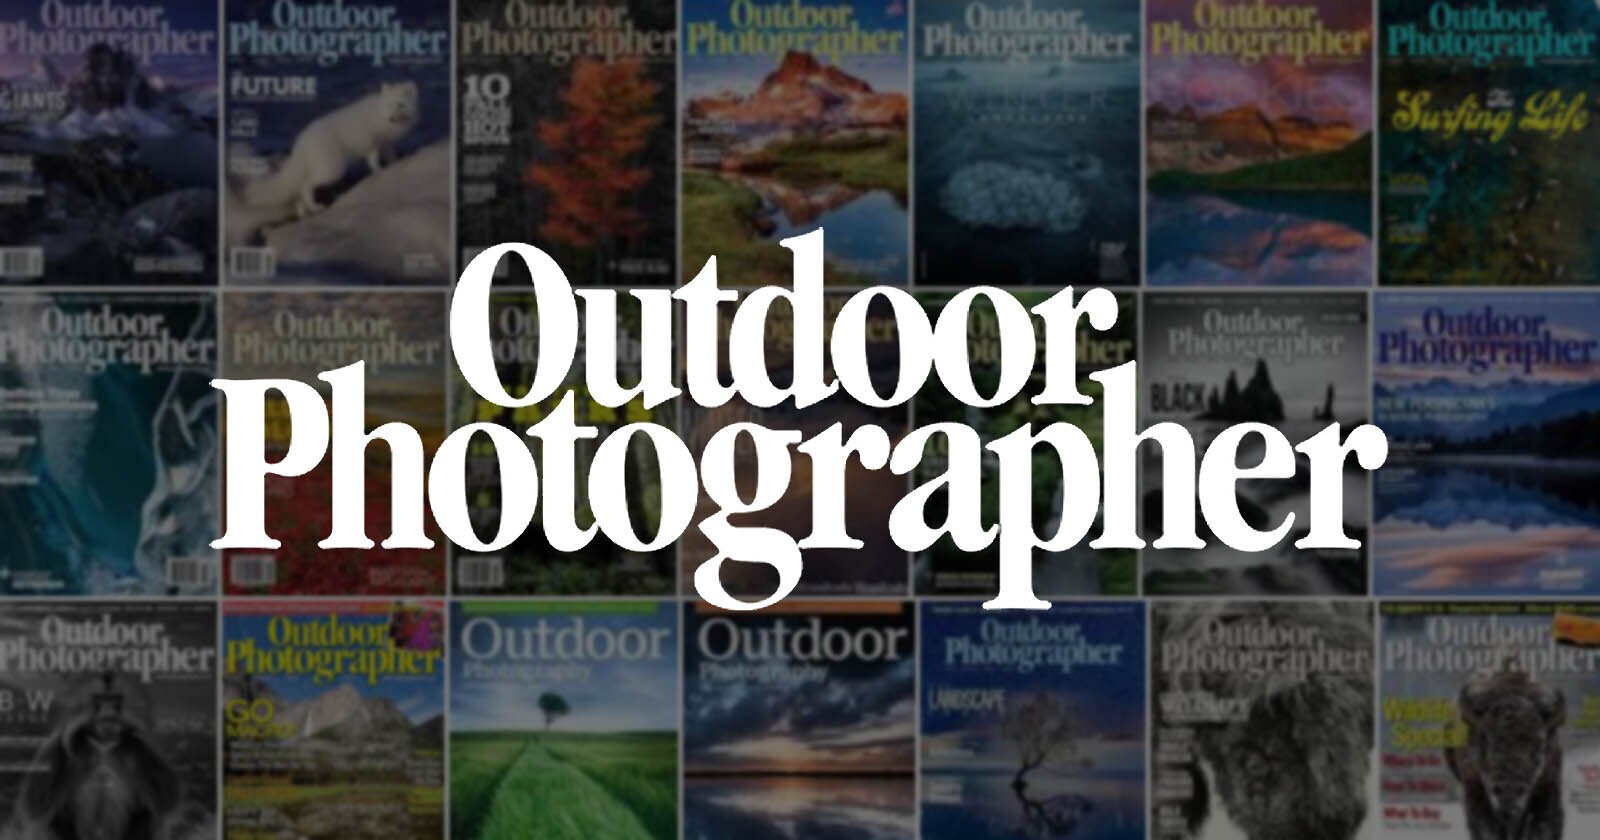  outdoor photographer grossly mismanaged contributors unpaid months 